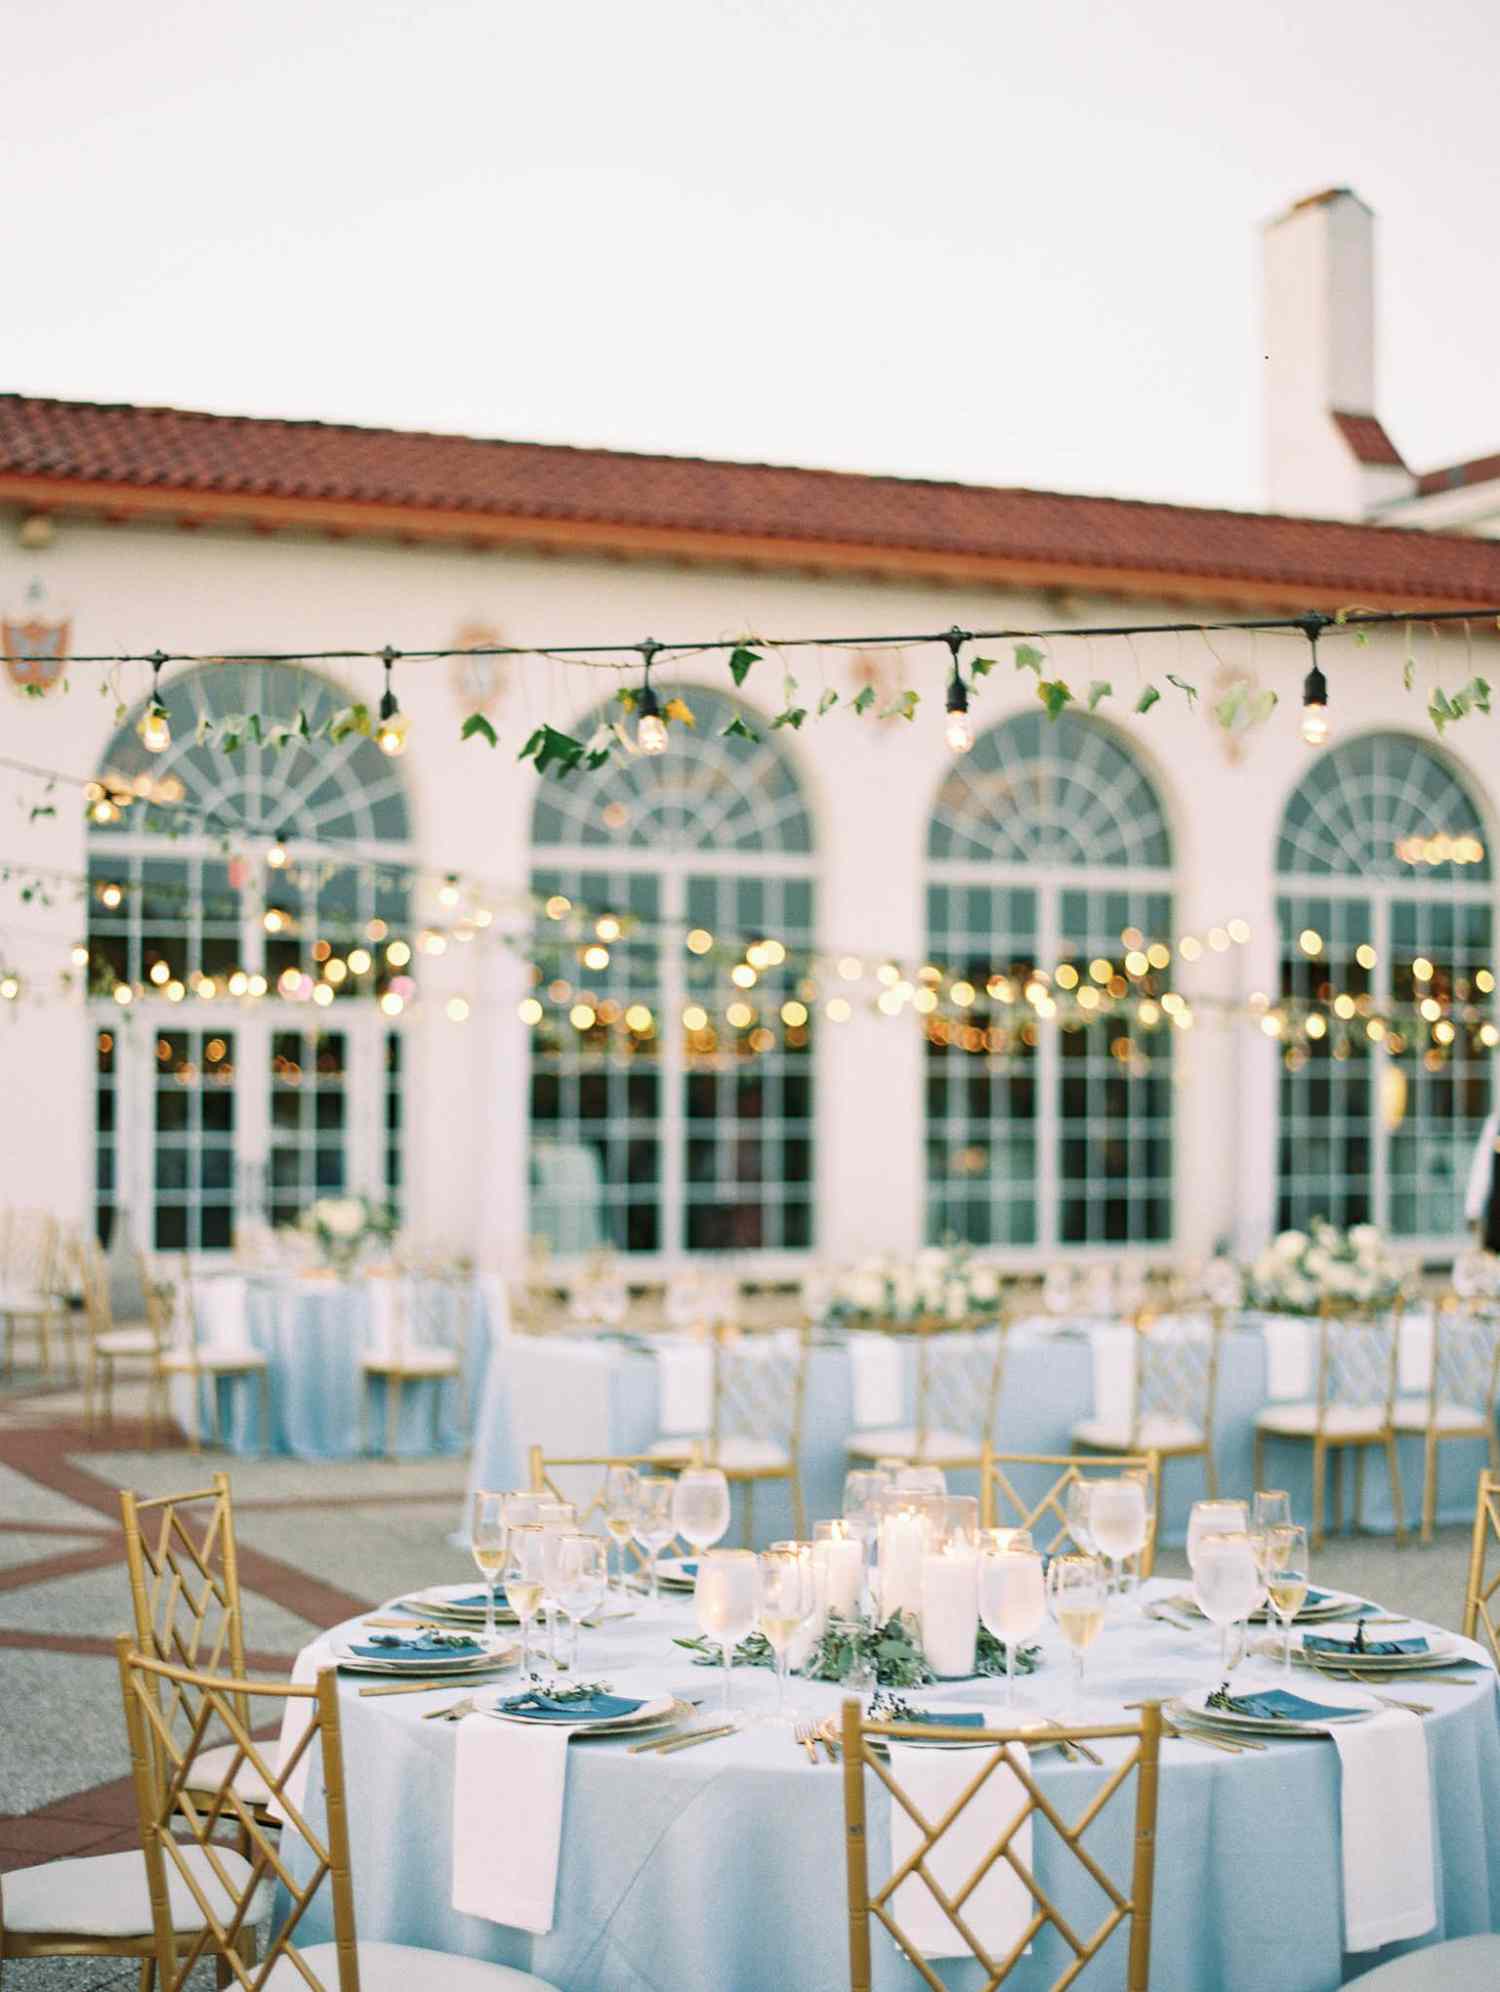 pale blue tablecloths on long and round tables with white linens, gold chairs, and tea lights